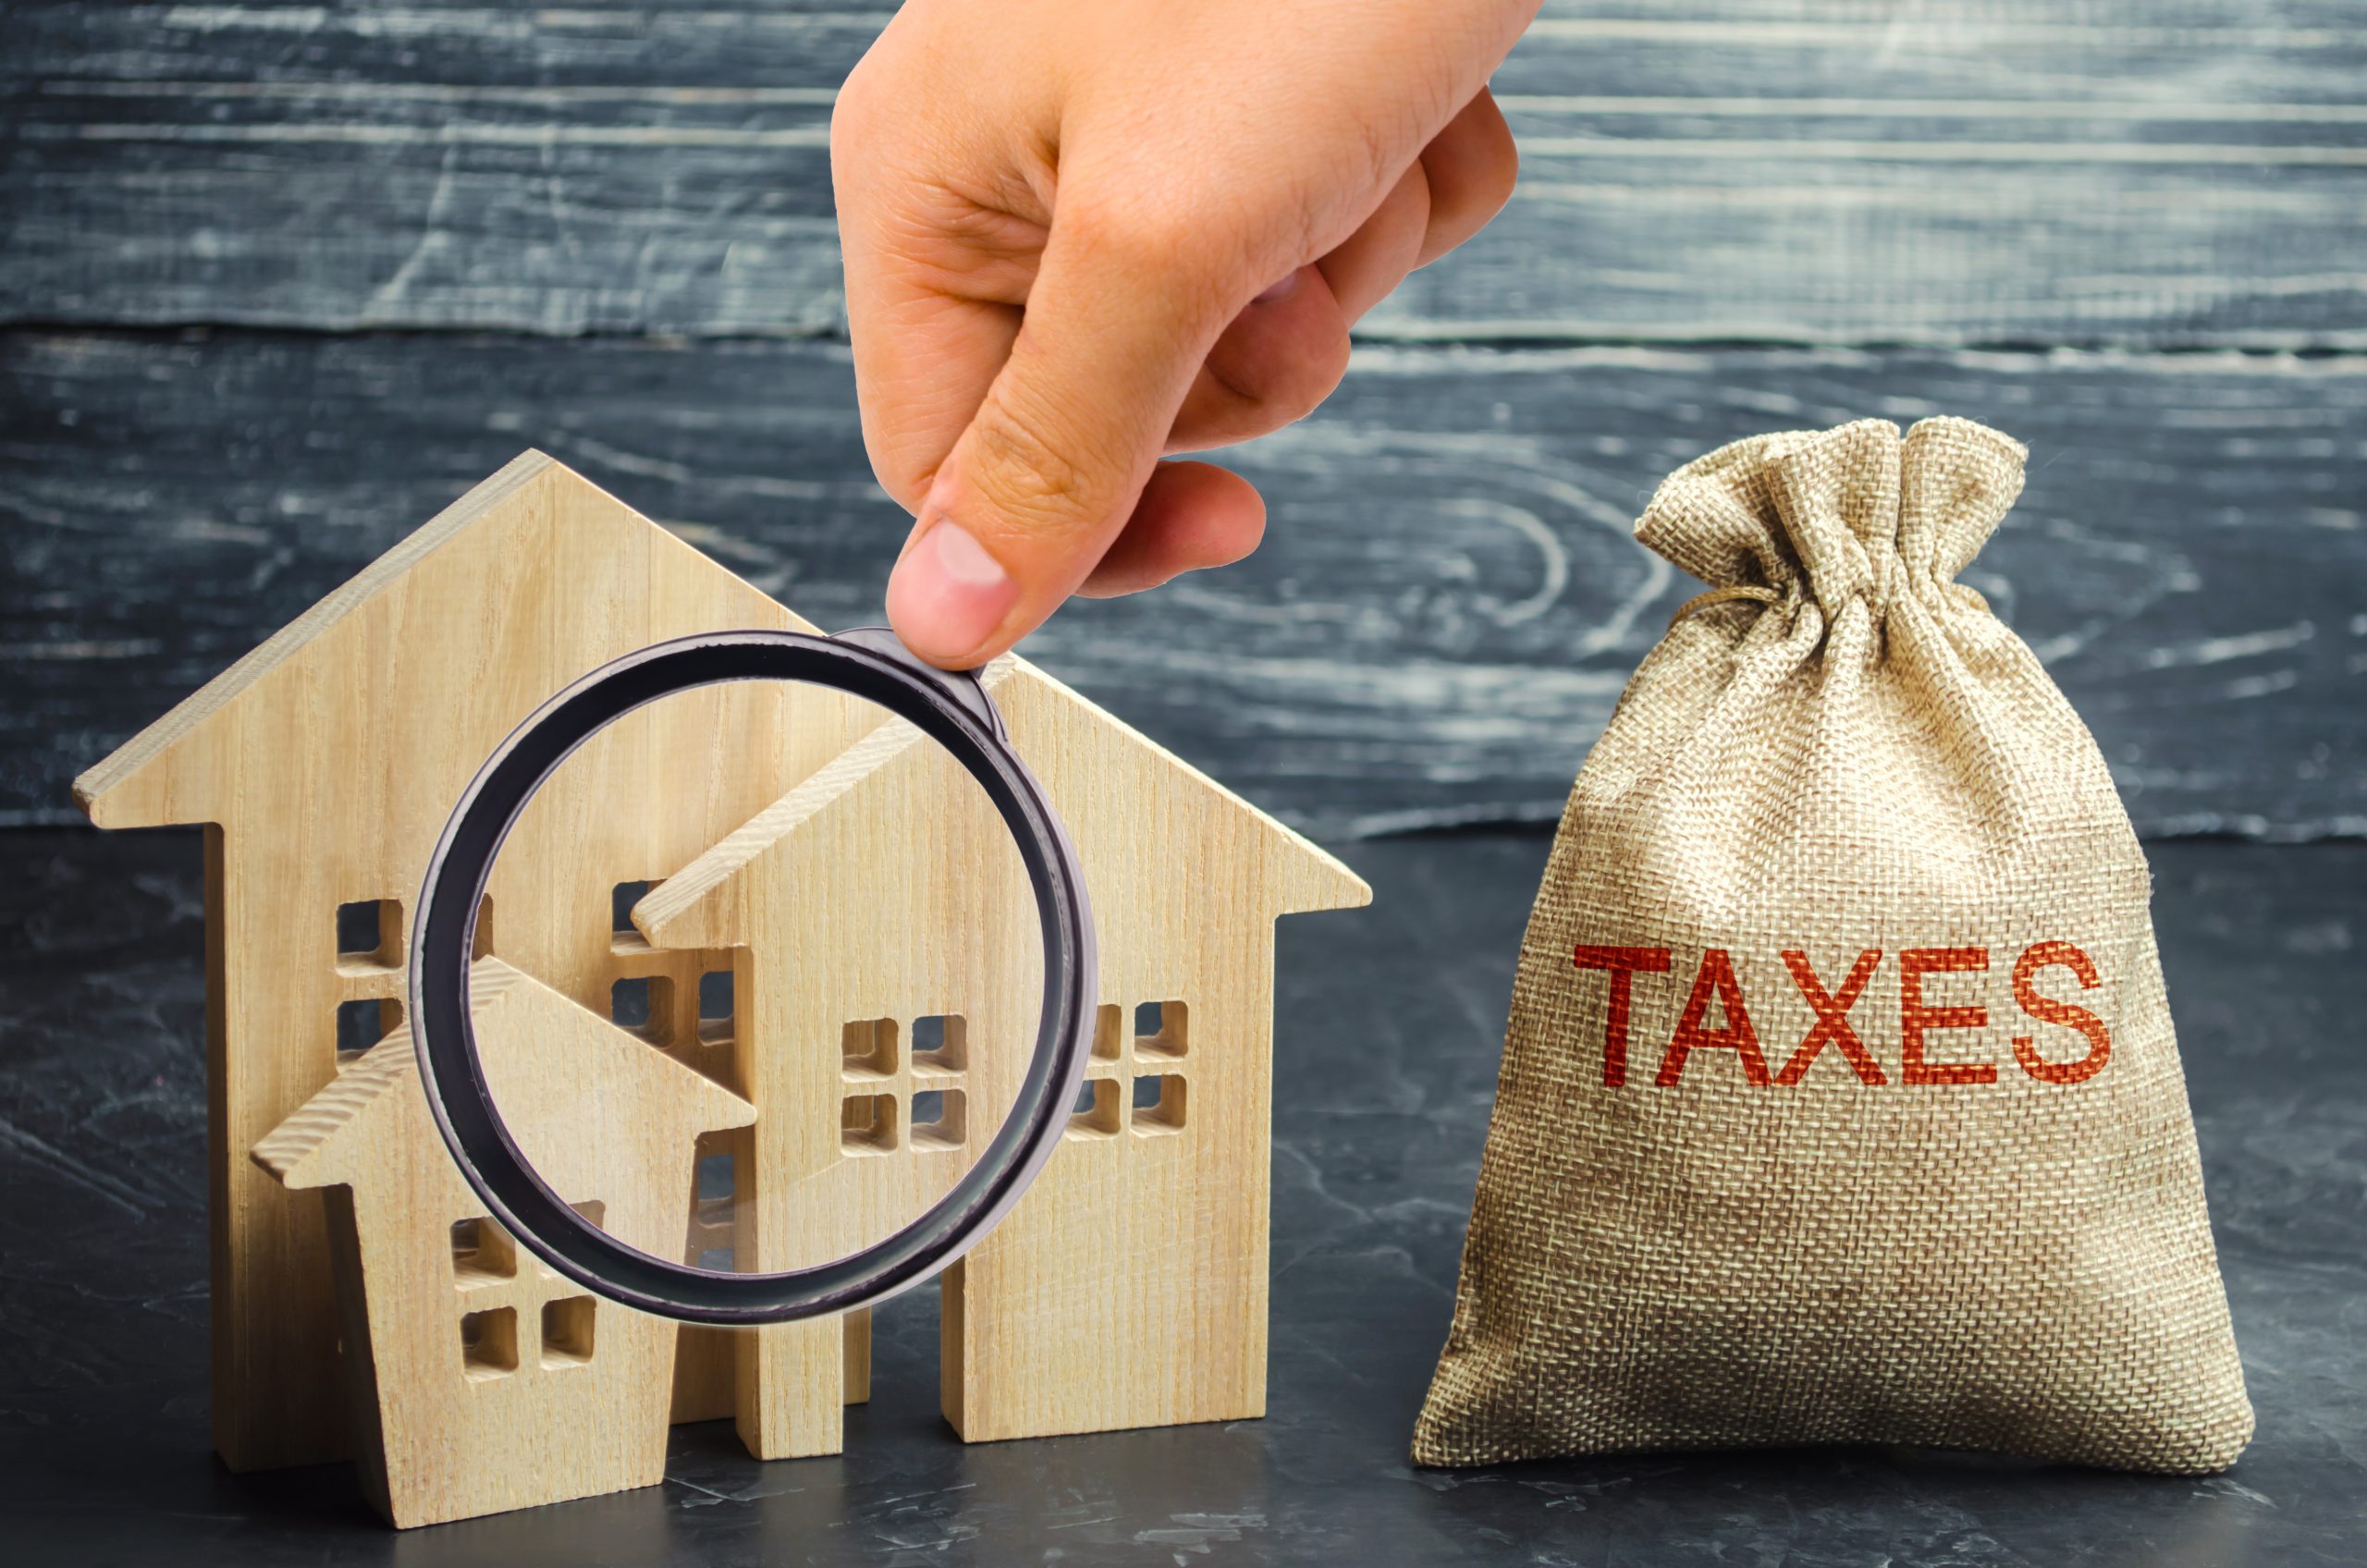 The Dos and Don'ts of Filing a Collin County Property Tax Protest